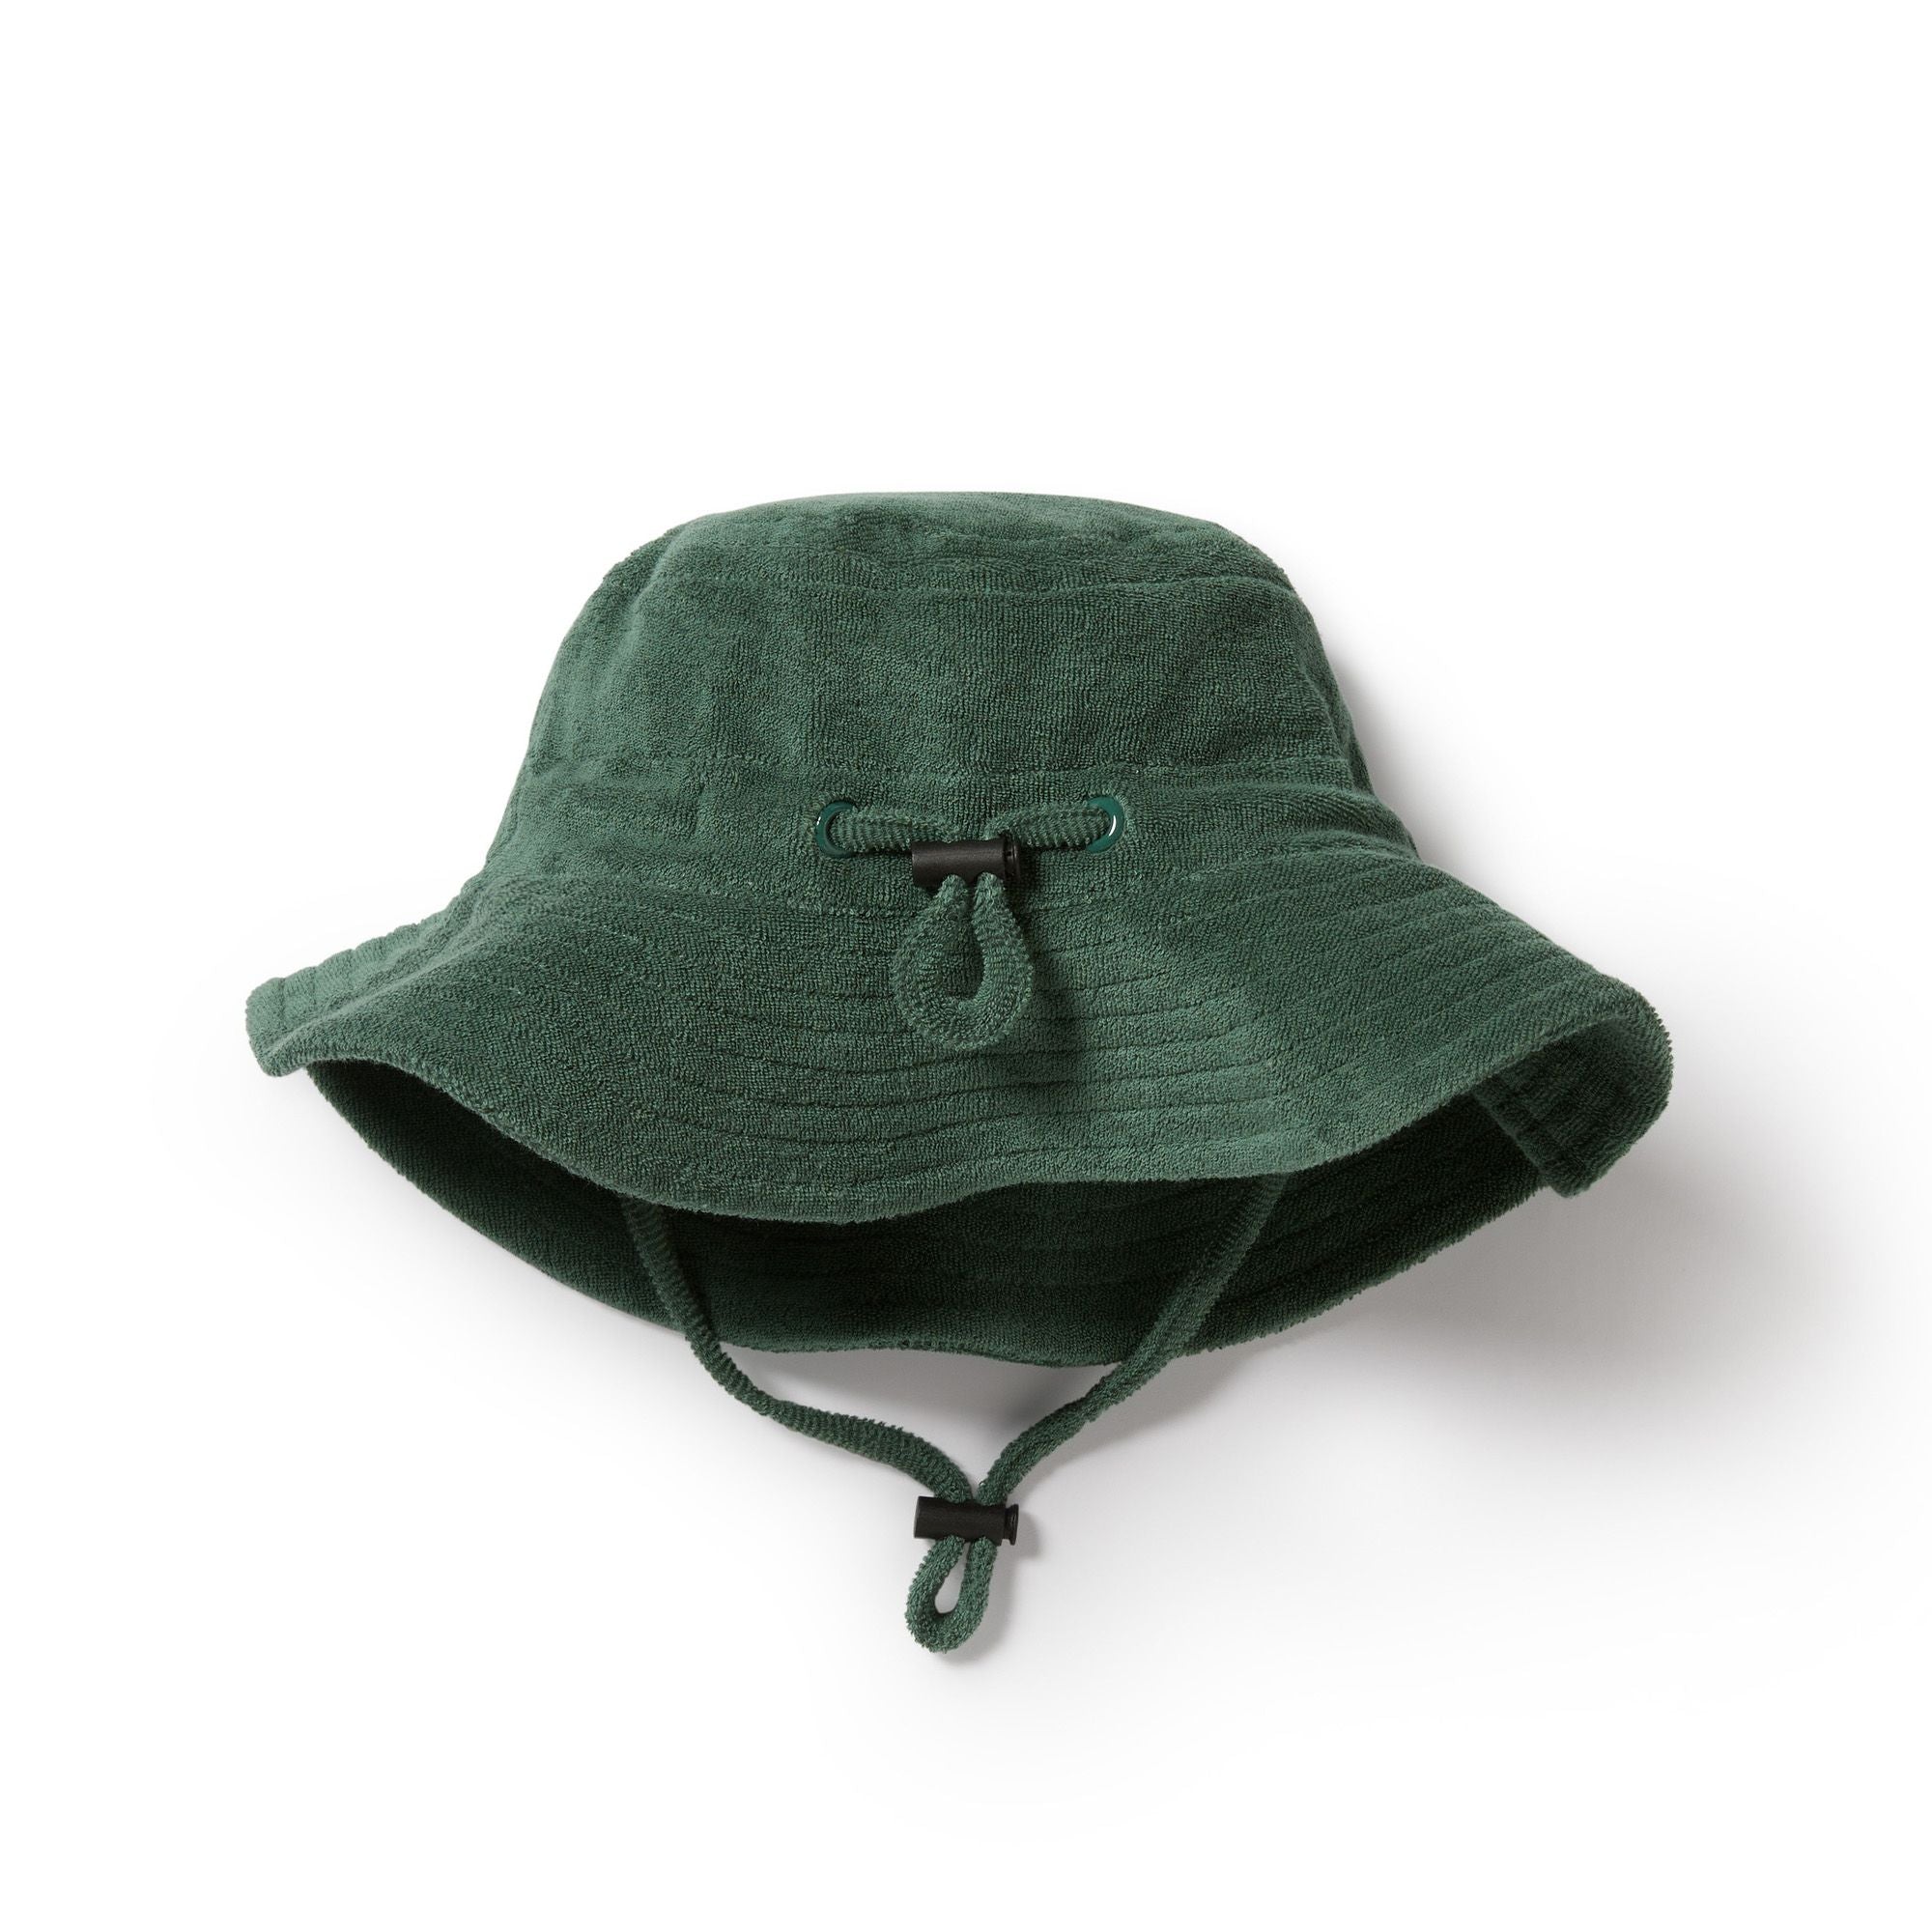 Elevate your little one's wardrobe with the adorable 'Allo' Baby Terry Cloth Green Bucket Hatfrom Wilson & Frenchy. Crafted with soft terry cloth fabric, this charming tee features the word 